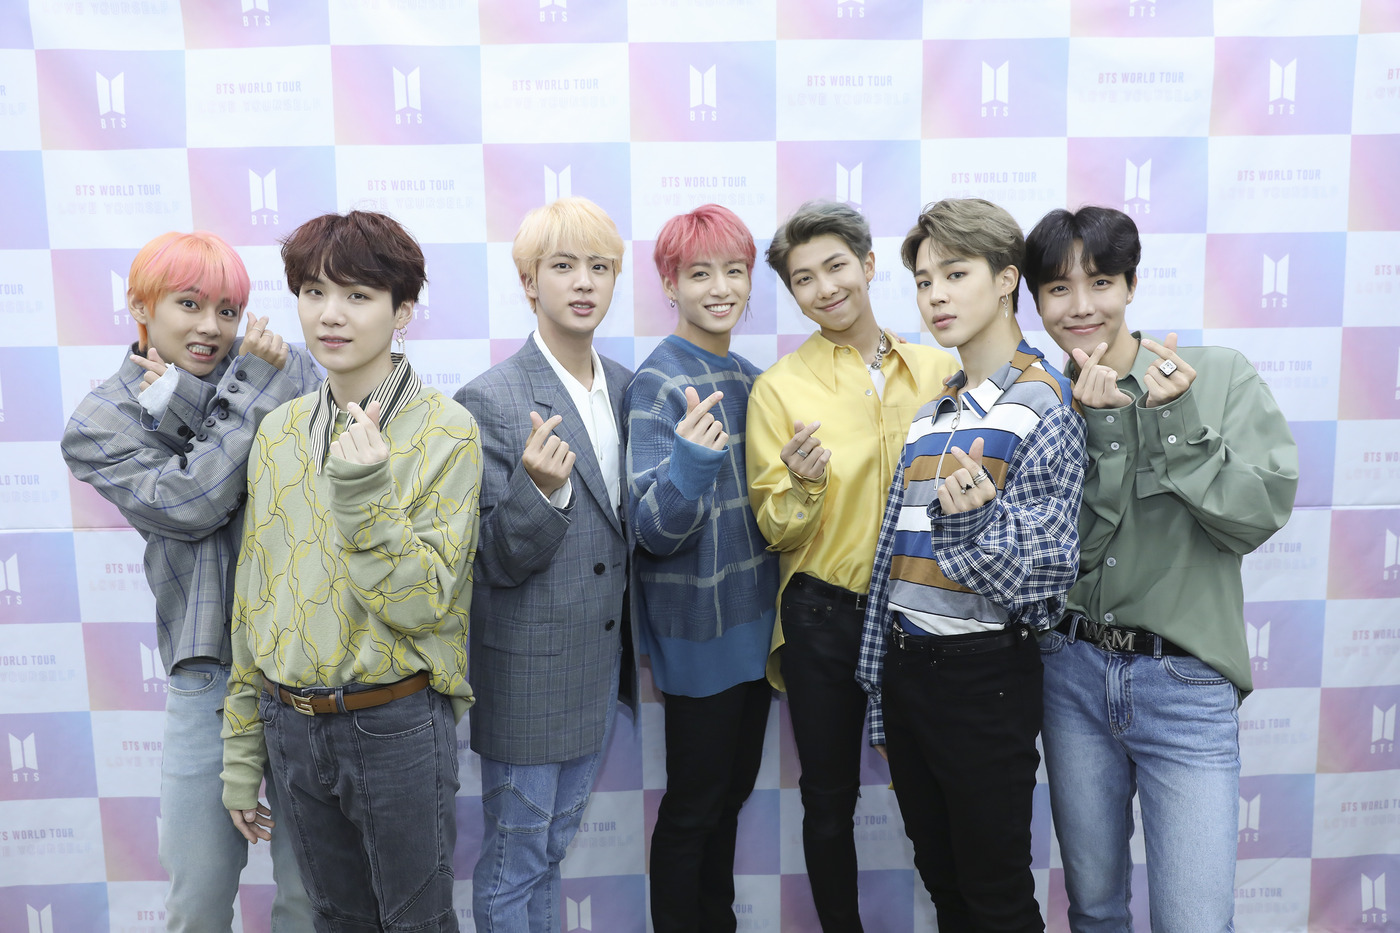 BTS is making a splash with its new album LOVE YOURSELF Answer released on August 24th.In particular, Nicki Minaj participated in the new song IDOL as a feature, and it further developed its firepower.LOVE YOURSELF Answer is an album that decorates the LOVE YOURSELF series that lasted for two and a half years. It is the only answer to find me in the self of many appearances.Now, their records are classified as a completely different category from domestic idol groups.Billboards 2nd consecutive #1...Word Chart ReceivedBTS has been on the domestic charts at the same time as the album release, and it has resonated with the World charts.Above all, his performance on the United States of America Billboard, a measure of the World pop market, continued.On the 2nd (local time), LOVE YOURSELF Answer was the number one player on the albums main chart of the United States of America Billboard.This is the second record since the last album LOVE YOURSELF Tear, and it was the first time for K pop to enjoy the first place in the second consecutive time.In addition to the album chart, it also reached # 11 on the Billboard Hot 100 chart based on streaming.BTSs Hot 100 highest entry figures are the 10th-highest in the song FAKE LOVE in June, the highest entry record among K-pops.BTS also ranked 11th with the title song IDOL and set the second highest entry record.As a result, BTS will hold the first and second place in the top entry record of Billboard Hot 100 at the same time.The response is huge in the UK as well as United States of America, according to the UK Official Chart, IDOL reached number 21 on the Official Singles Chart.This is the highest record of the K-pop group, which was the highest record of its own record (42nd place) set as FAKE LOVE in May.Earlier, IDOL was the number one spot on the top song charts in 66 countries and regions including United States of America, Canada and the UK, and Dolph Ziggler Minaj participated in the feature IDOL (Feat).Nicki Minaj) also topped nine regions, including Nicaragua, Macau and the Dominican Republic.This album showed its influence by exceeding 860,000 album sales volume only in the first week of release.LOVE YOURSELF Answer, which has been in the LOVE YOURSELF series for a year and a half, has set a record of more than 860,000 copies, even though it is a repackaged album.The music video, which boasted of its splendor, was also powerful.BTS new song IDOL music video surpassed 56.26 million views in 24 hours, ranking first in 24 hours on YouTube, and recorded the shortest time of 100 million views in the history of Korea group on August 29, 23 hours on the 4th.Great: Praise poured from abroadUnited States of America local media, including Billboard, MTV, Time (TIME), and Vogue (VOGUE), have highlighted BTS new album.On August 24, Billboard posted an article titled BTS took pride in itself through the lively IDOL music video.Billboard introduced his new album and new song IDOL and praised BTS is clearly at the top of the Music World in 2018.IDOL shows hybrids in all aspects of song lyrics, music, and music videos.MTV also reported, BTS energy-rich new song IDOL exceeds expectations.MTV said, BTS has started a global festival based on Korean culture. IDOL expresses that BTS is not a temporary phenomenon, but a movement with fan ARMY based on creativity and enthusiasm.Many local media outlets, including Time and Vogue and Hollywood Life, showed interest in collaboration with BTS and Nicki Minaj.Superstar BTS has made a big leap for the United States of America main stream, the article said. IDOLs music video is fantastic from beginning to end, showing a completely new level of change from visual to performance.BTS has not forgotten their identity while calling for a World sensation, and the use of Earsu contains festivals with fans.Interest of overseas stars and former World fansDolph Ziggler Minaj, who featured on IDOL, wrote on his SNS: Congratulations to BTS, who has released a wonderful new album.It is an honor to be part of this album. All World fans are also communicating with BTS with fun events.Fans around World are becoming more fashionable to share videos of Idolsey Vonn (#IDOLCHALLENGE) that mimic IDOL dance moves.This started with the release of the IDOL choreography video of members Jimin, Jungkuk and Jay Hop.As the Lindsey Vonn video boomed, United States of America NBC focused on the phenomenon, and United States of America, including TeenVOGUE and Mashable, also reported the BTS IDOL dance challenge.Grammy Natural History Museum, London ... Reversal MoveBTS will make all-time moves in this activity.On the 11th, United States of America Grammy Natural History Museum, London hosted the BTS conversation.The event will be hosted by the Grammy Natural History Museum and Scott Goldman in London.In addition, they will perform at the United States of America New York City Field on October 6th, where Paul McCartney and Beyonce stood.It is the first Korean singer to be on the stage in City Field.BTS will continue its LOVE YOURSELF tour at the United States of America Los Angeles Staples Center on the 5th.